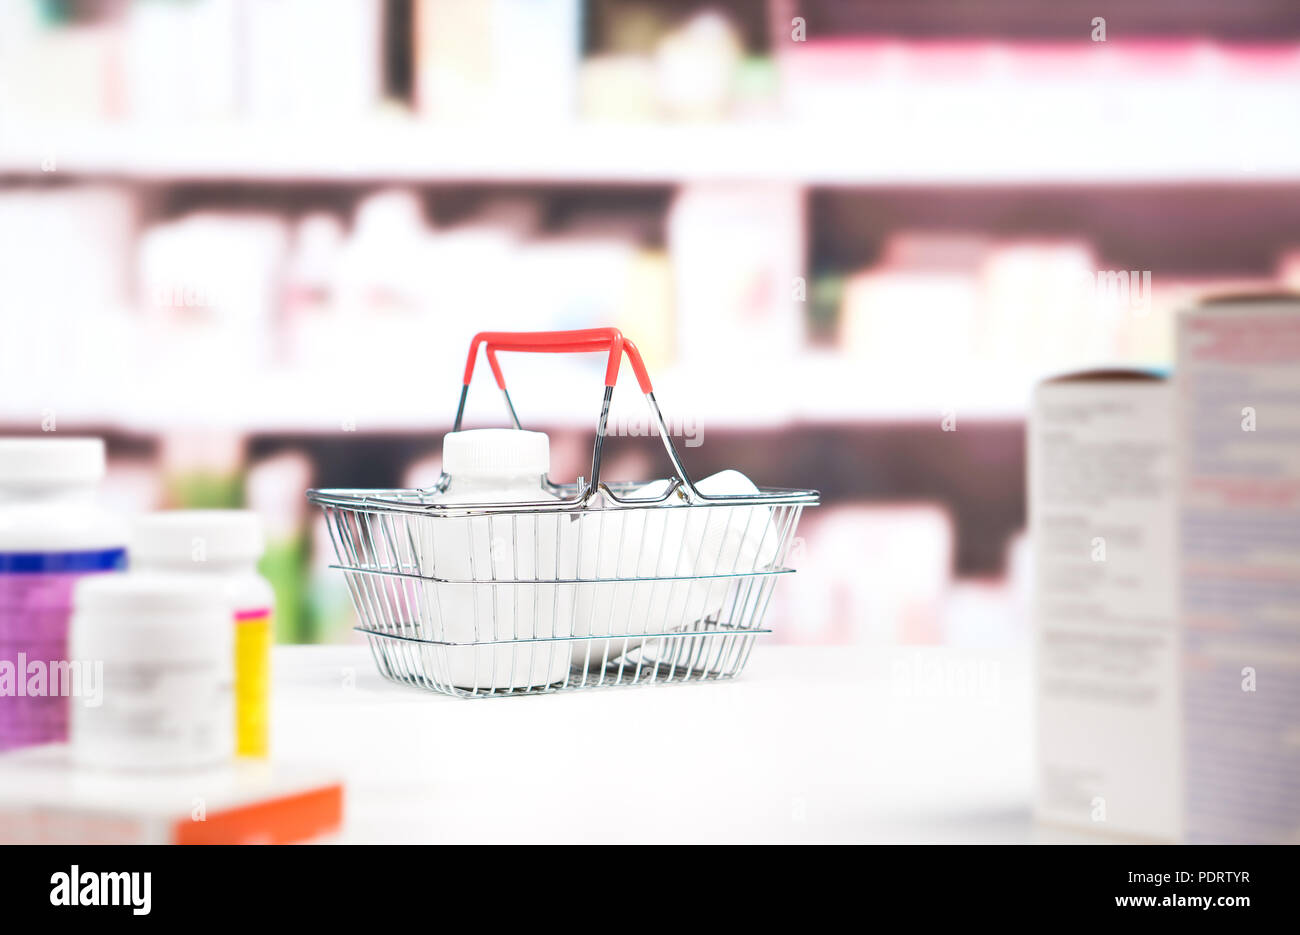 Pharmacy with medication and shelves. Shopping basket full of medicine and pill bottles on the counter in drugstore. Stock Photo